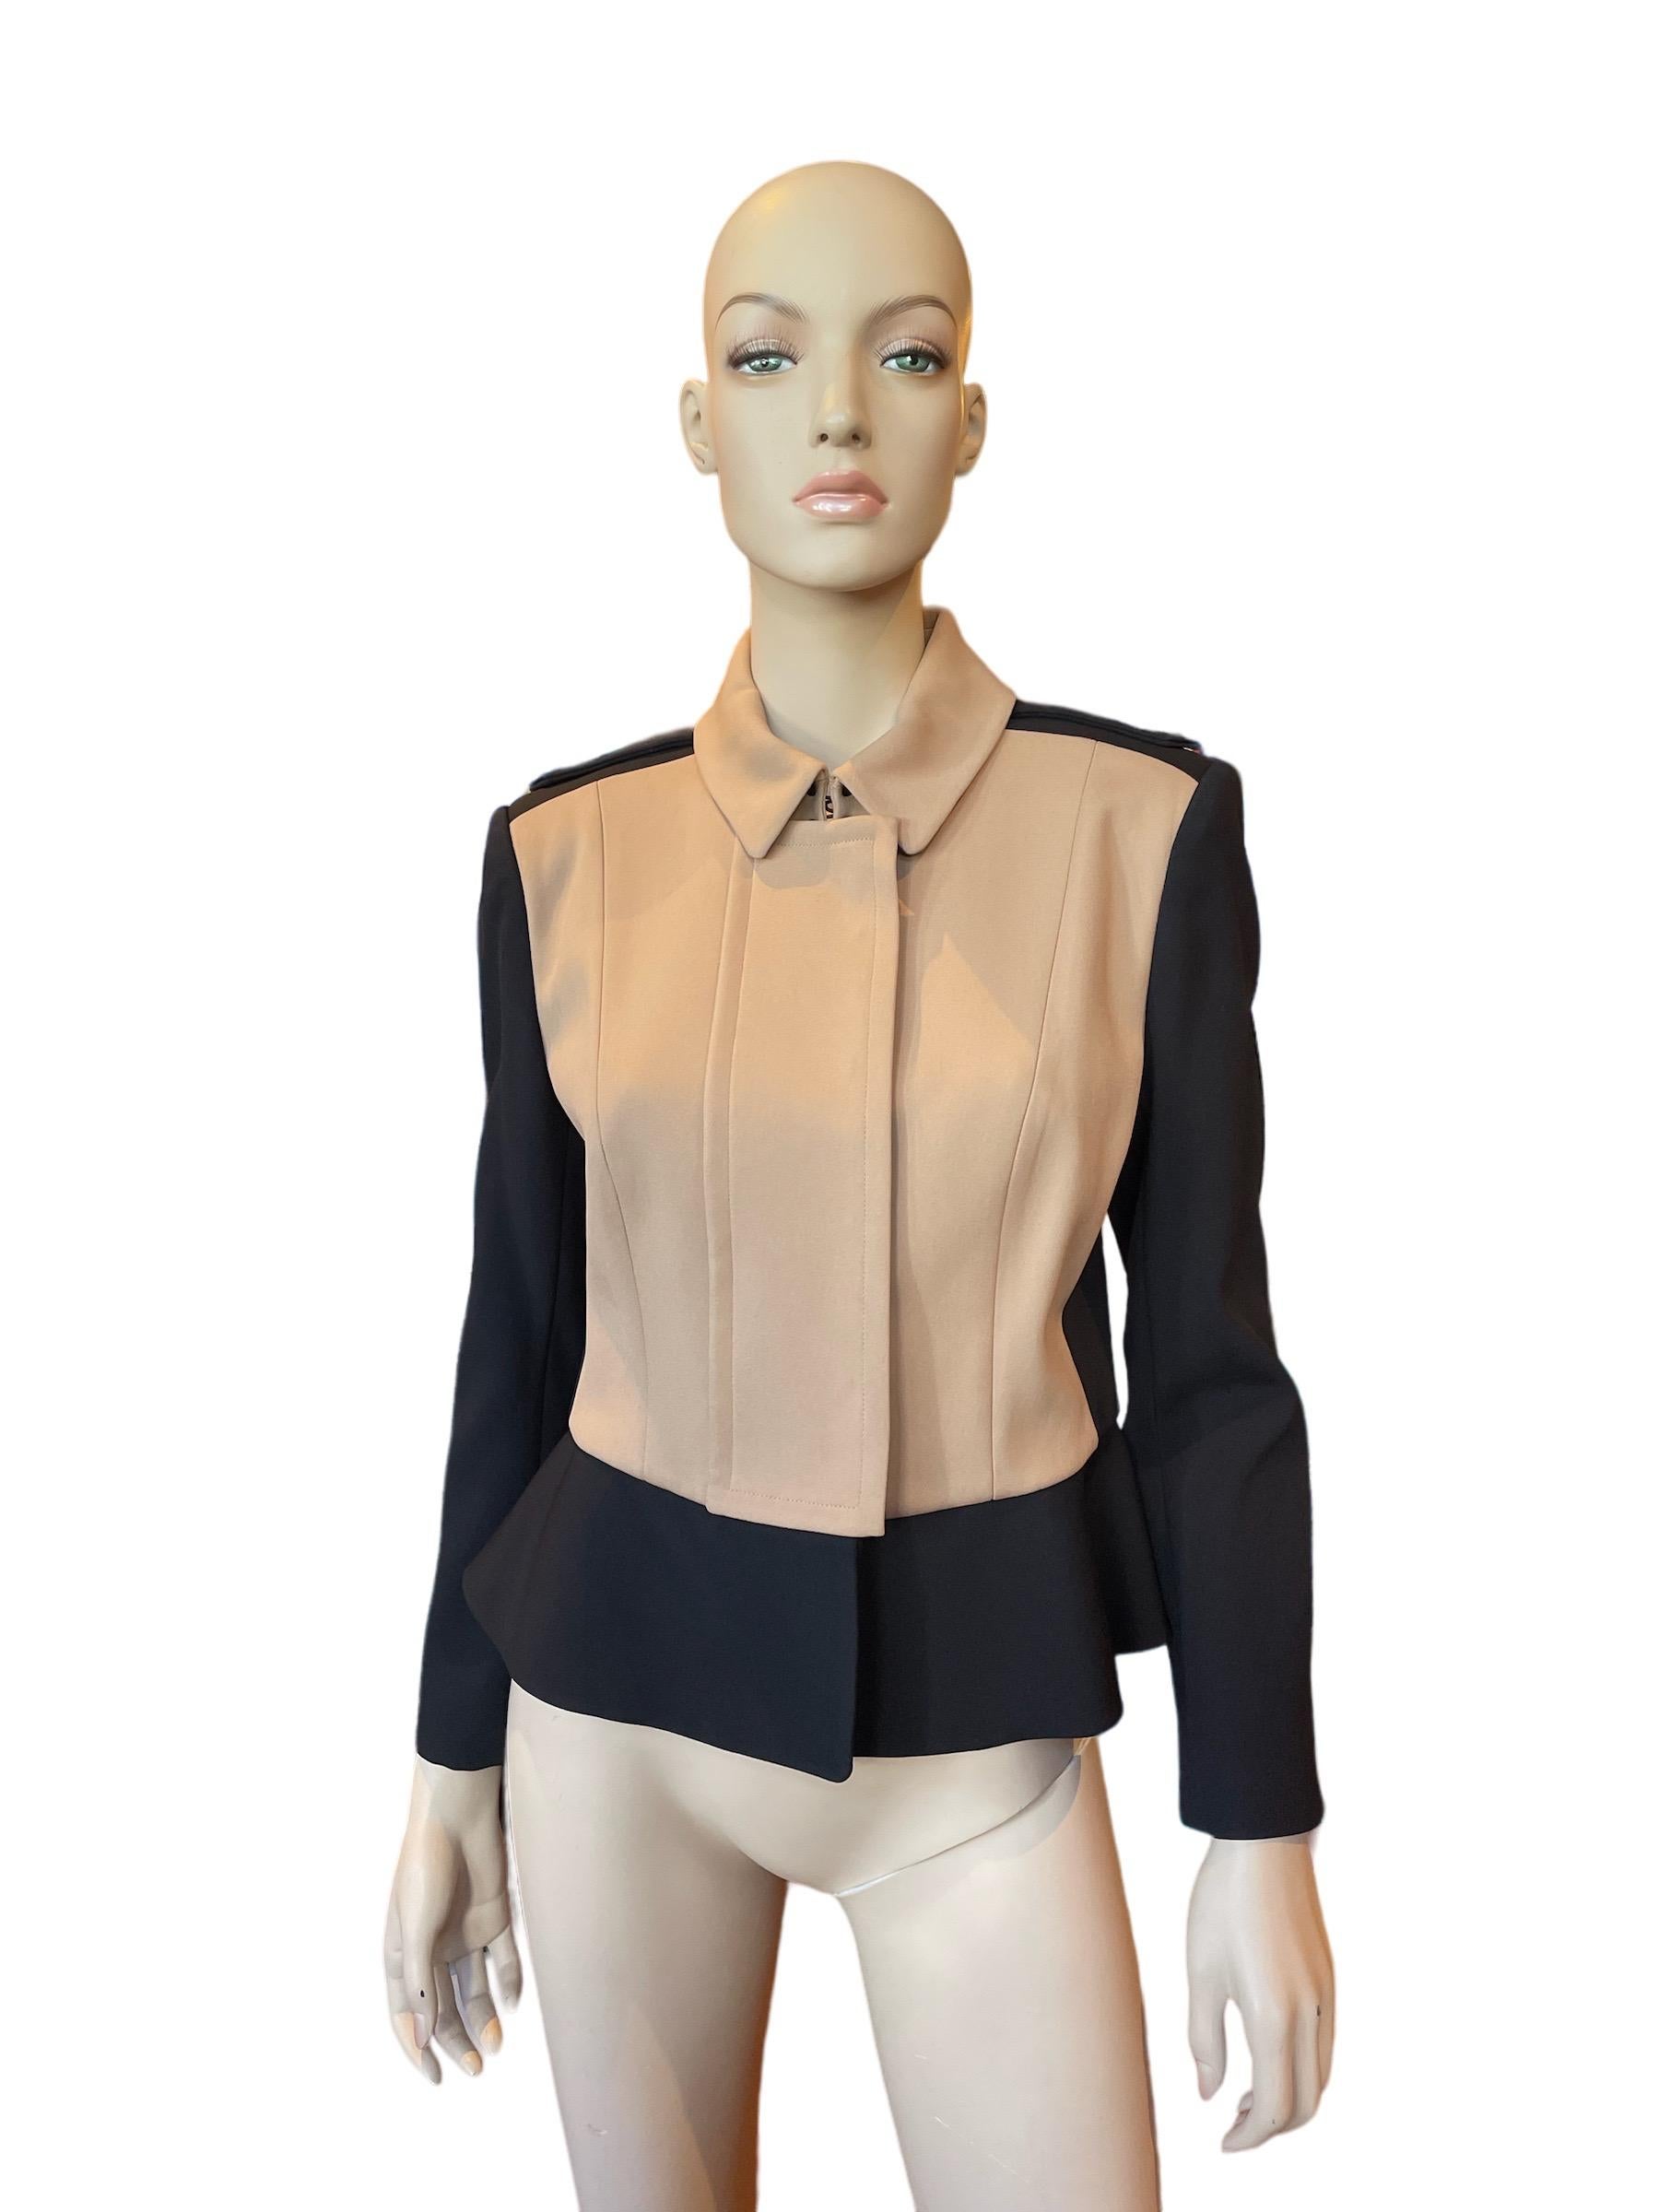 Burberry Prorsum Black and Tan Tailored Peplum Jacket 

Amazing jacket for a night out! Looks great on! 

